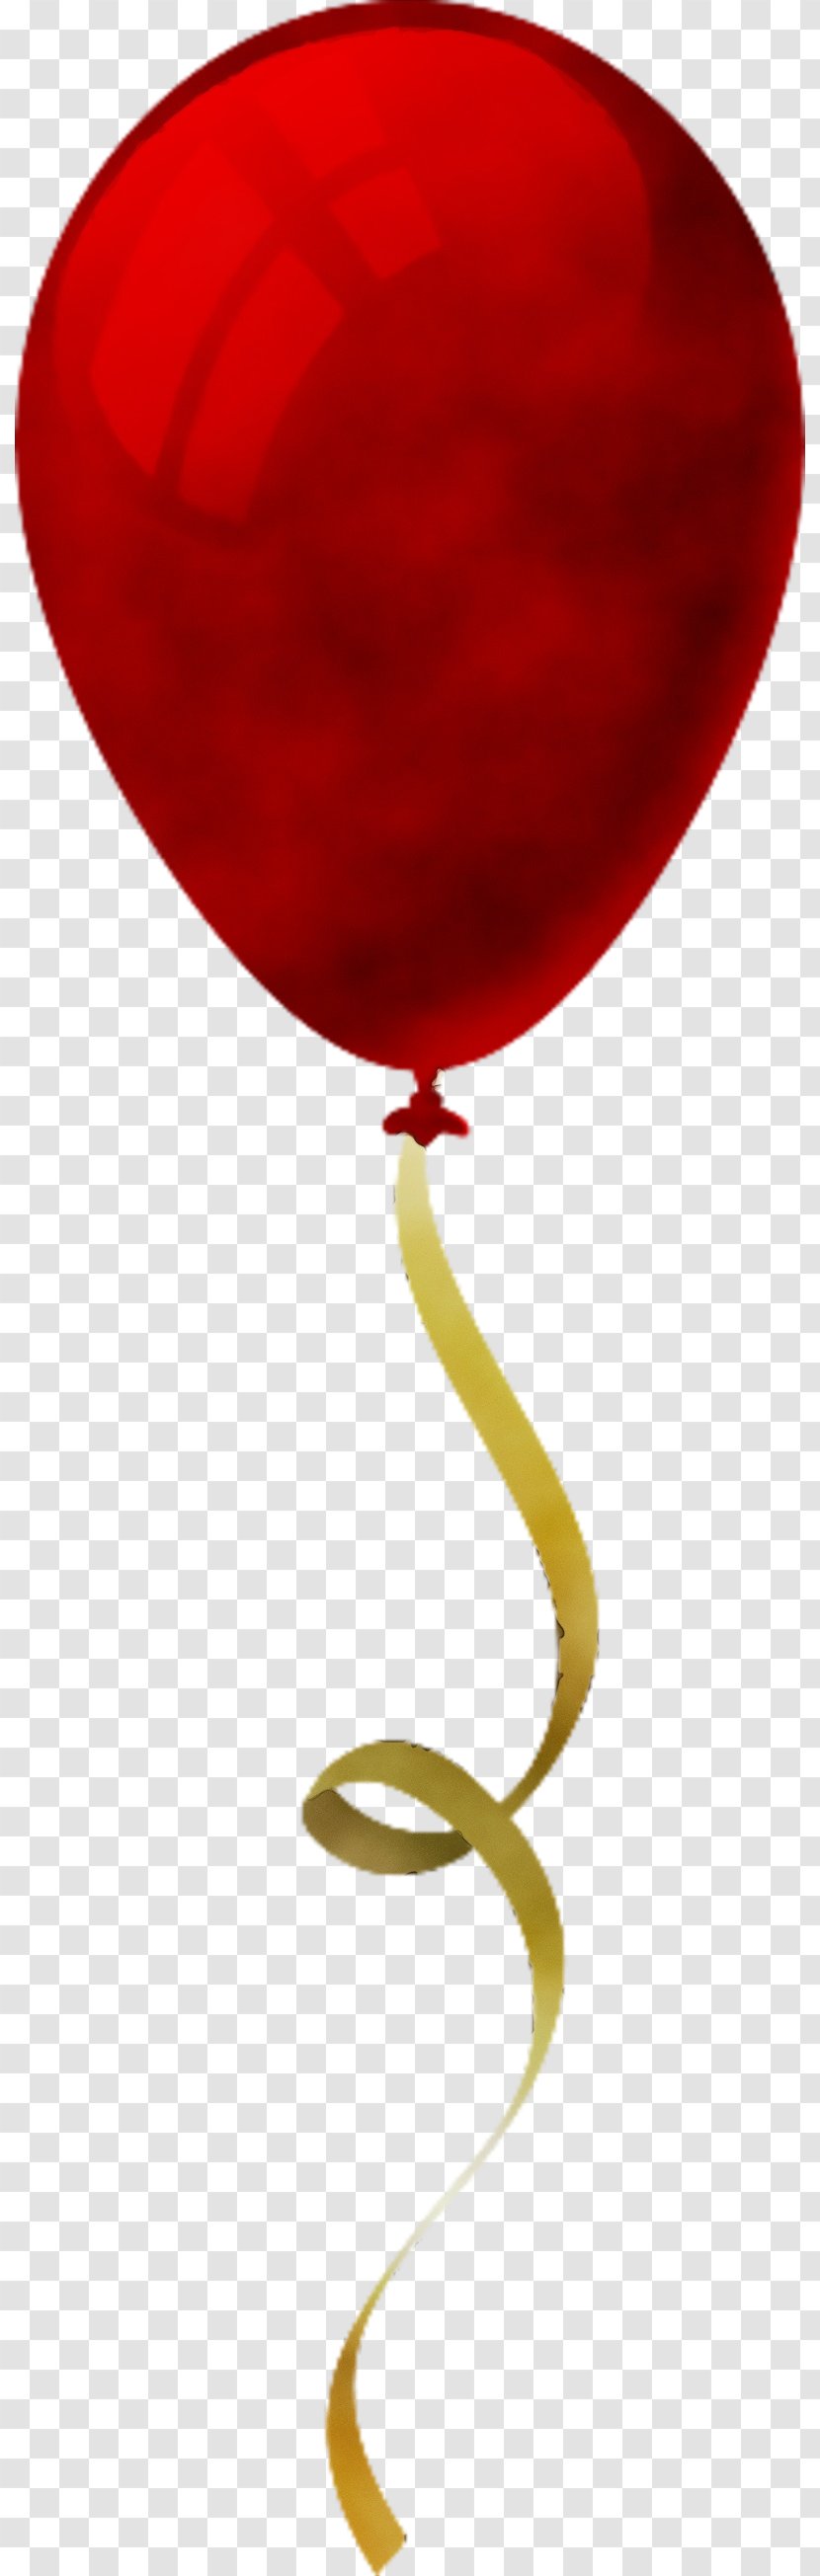 Balloon Birthday Clip Art Party - Painting - Red Transparent PNG